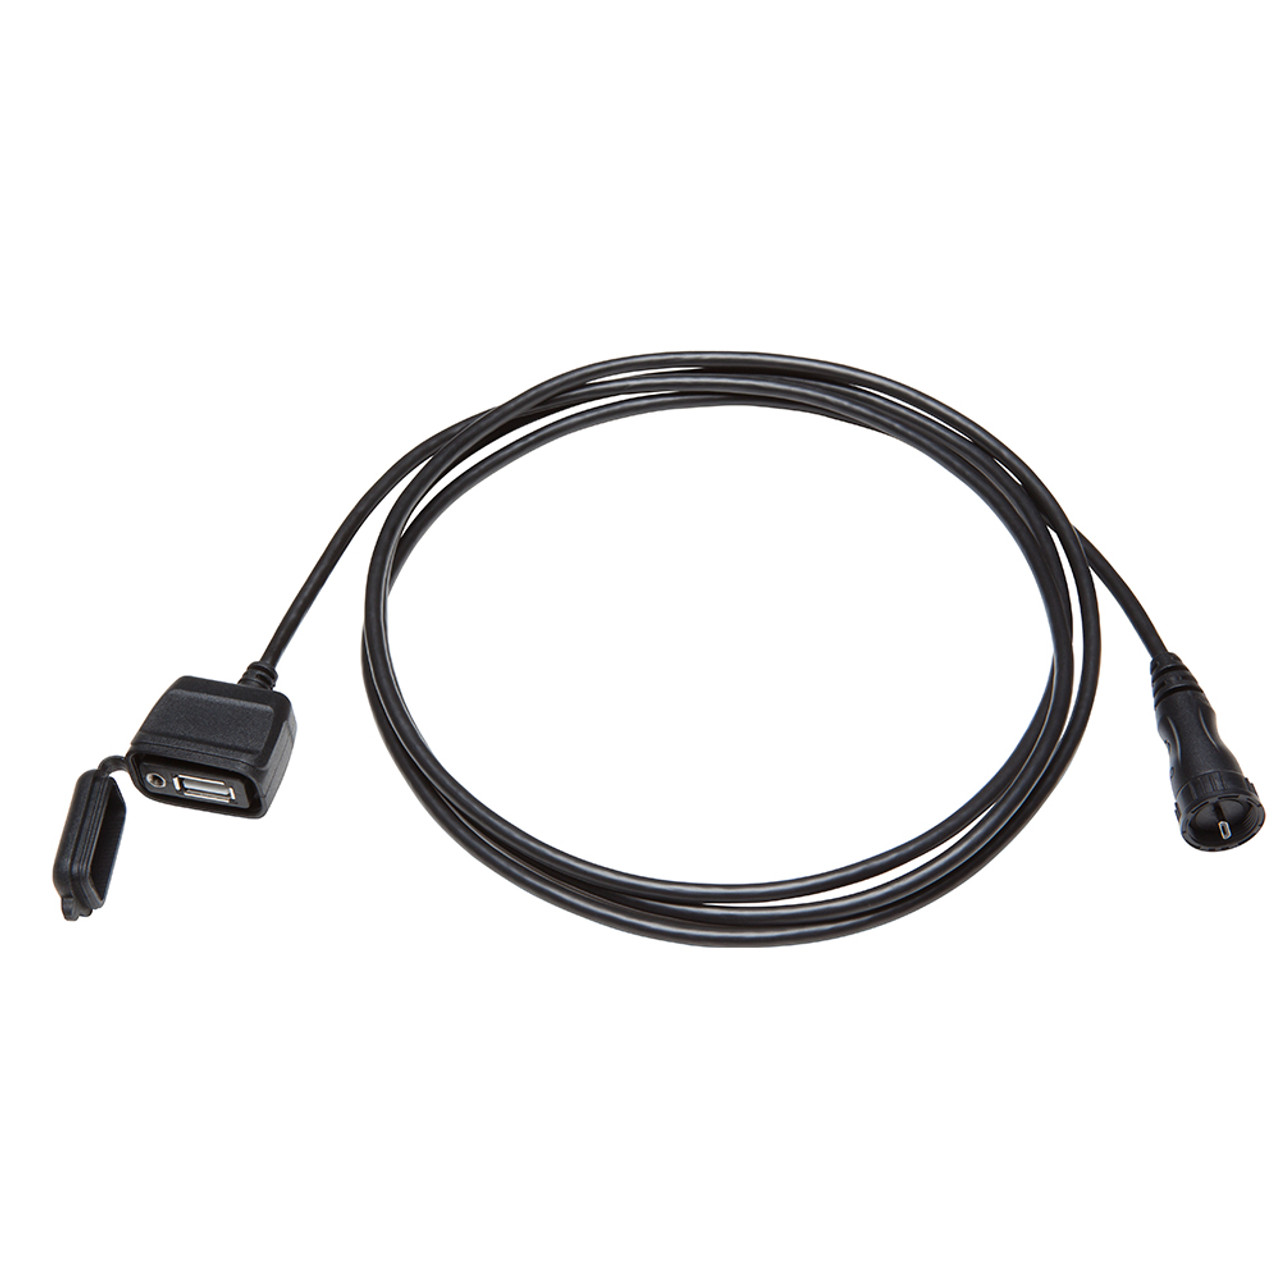 Garmin OTG Adapter Cable f\/GPSMAP 8400\/8600 [010-12390-11]